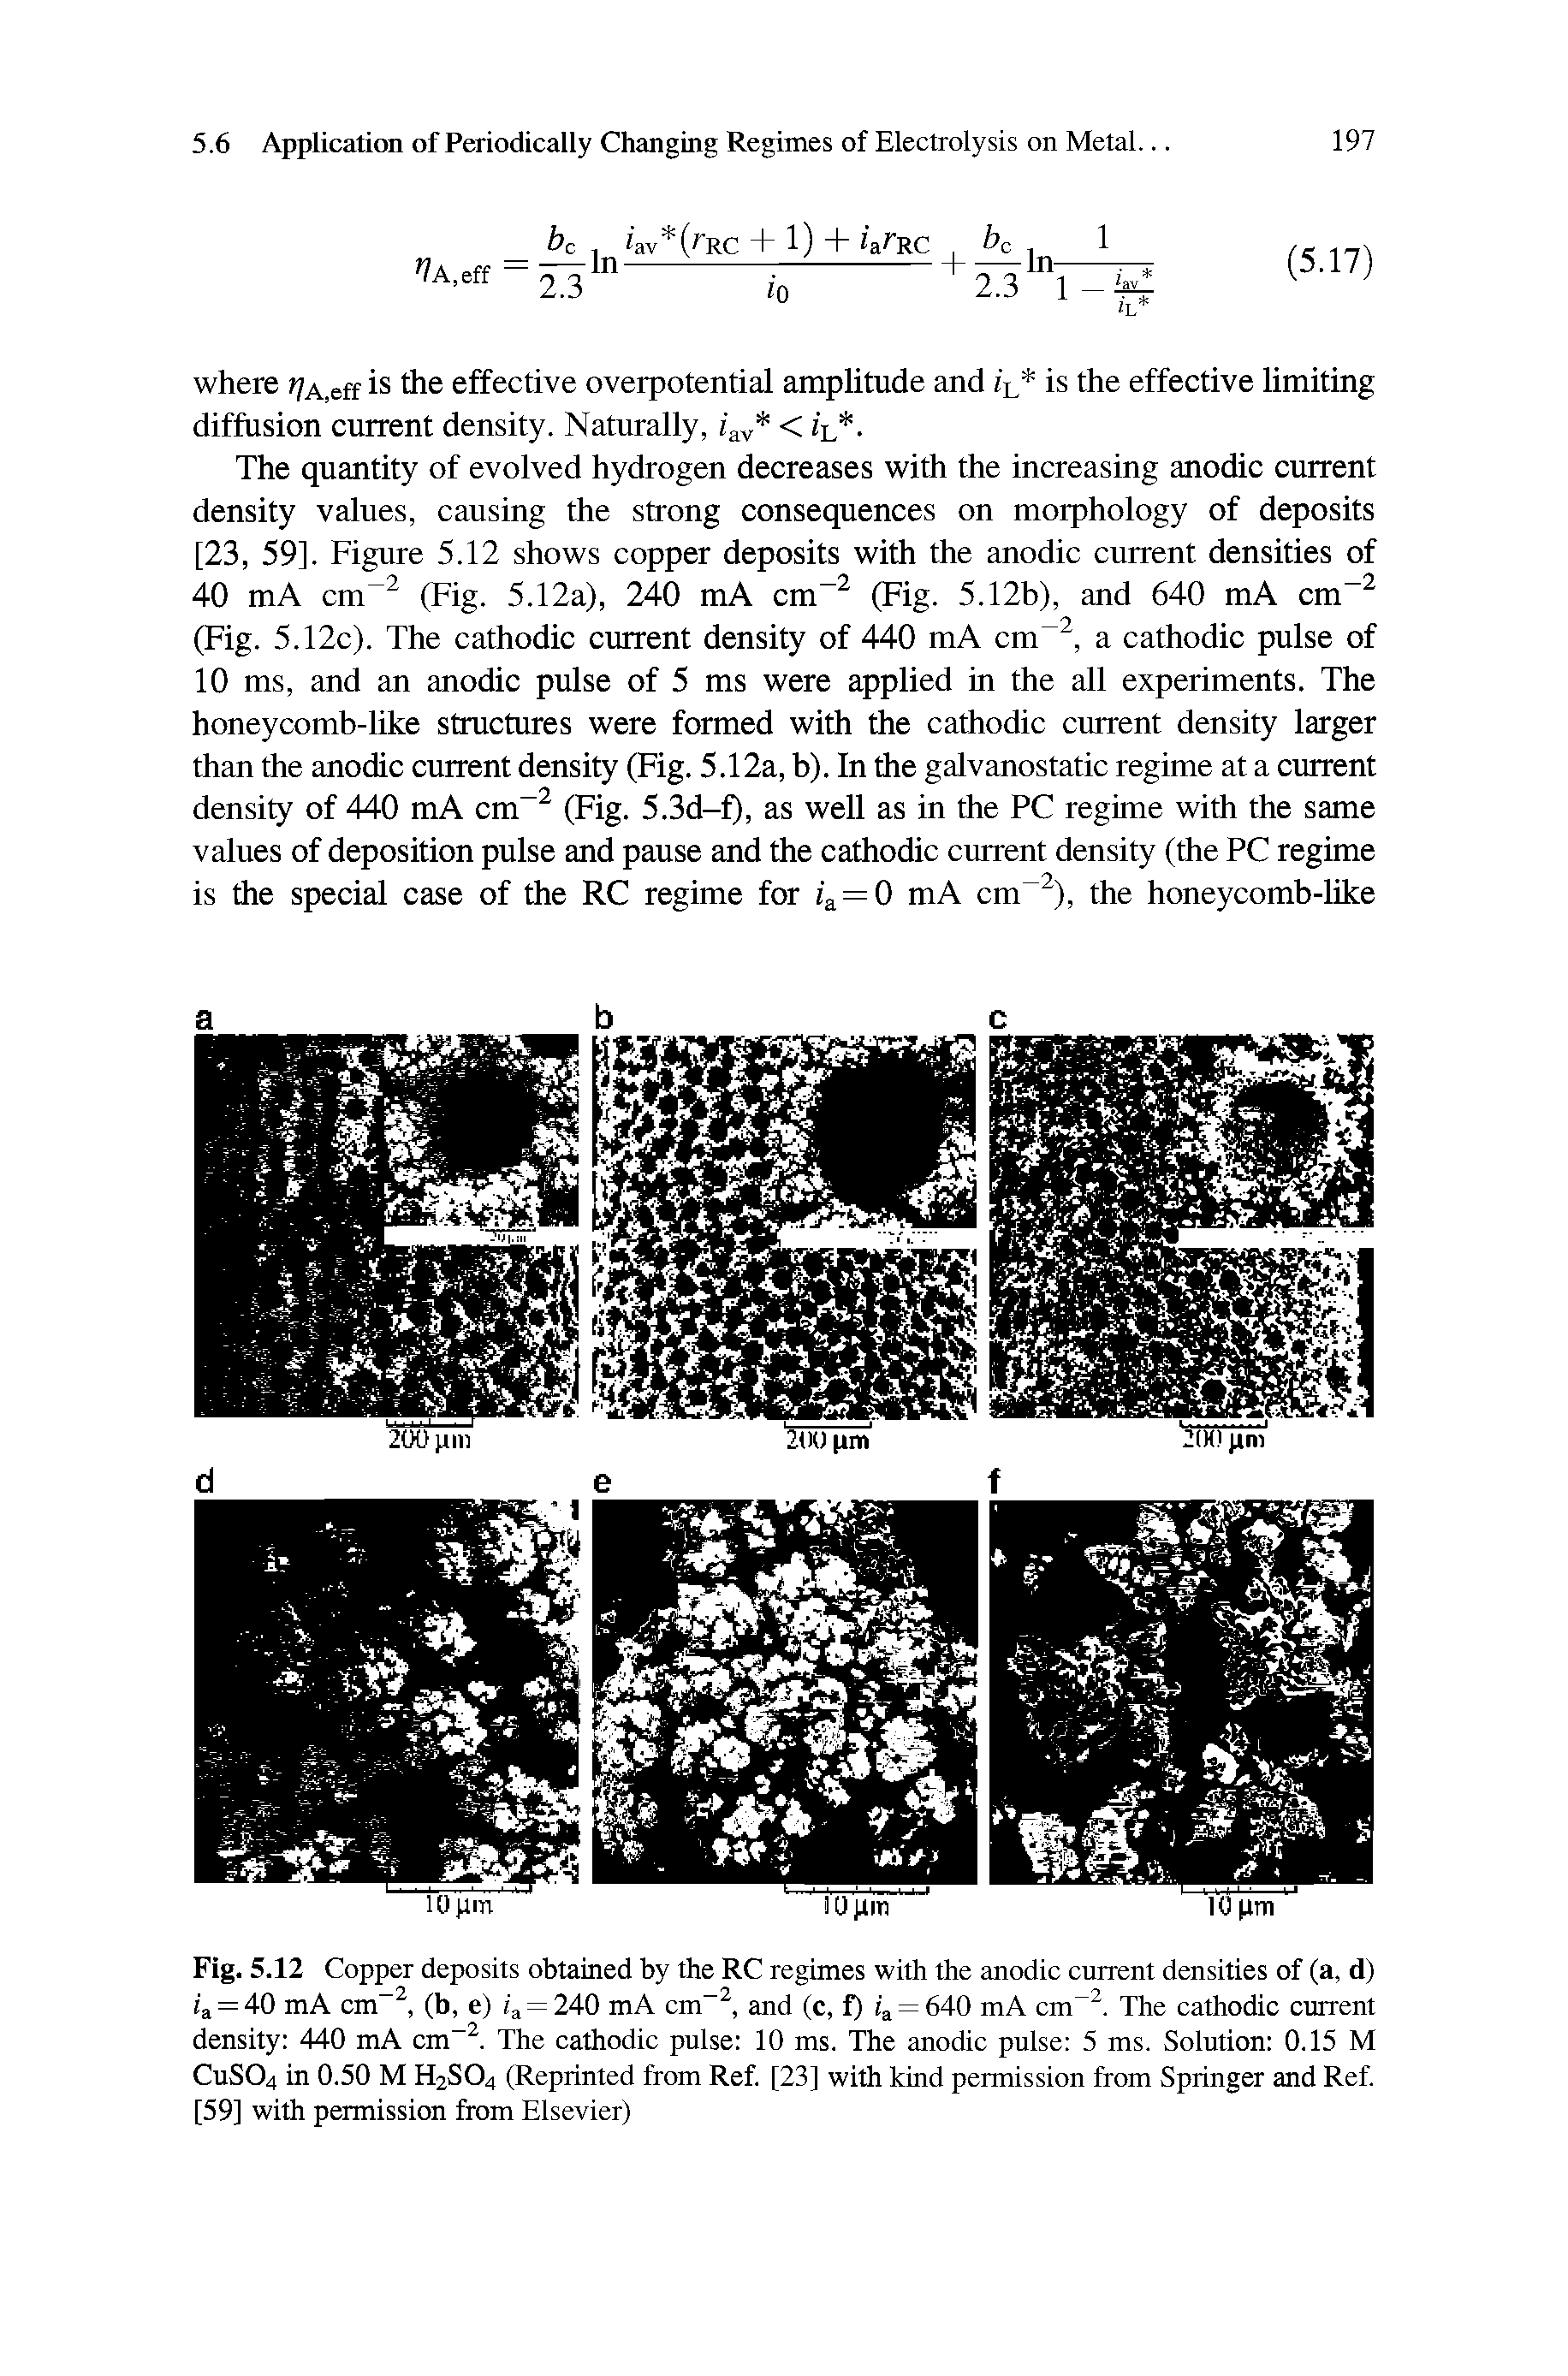 Fig. 5.12 Copper deposits obtained by the RC regimes with the anodic current densities of (a, d) a = 40 mA cm (b, e) 4 = 240 mA cm and (c, f) 4 = 640 mA cm . The cathodic current density 440 mA cm . The cathodic pulse 10 ms. The anodic pulse 5 ms. Solution 0.15 M CuSOa in 0.50 M H2SO4 (Reprinted from Ref [23] with kind permission from Springer and Ref [59] with permission from Elsevier)...